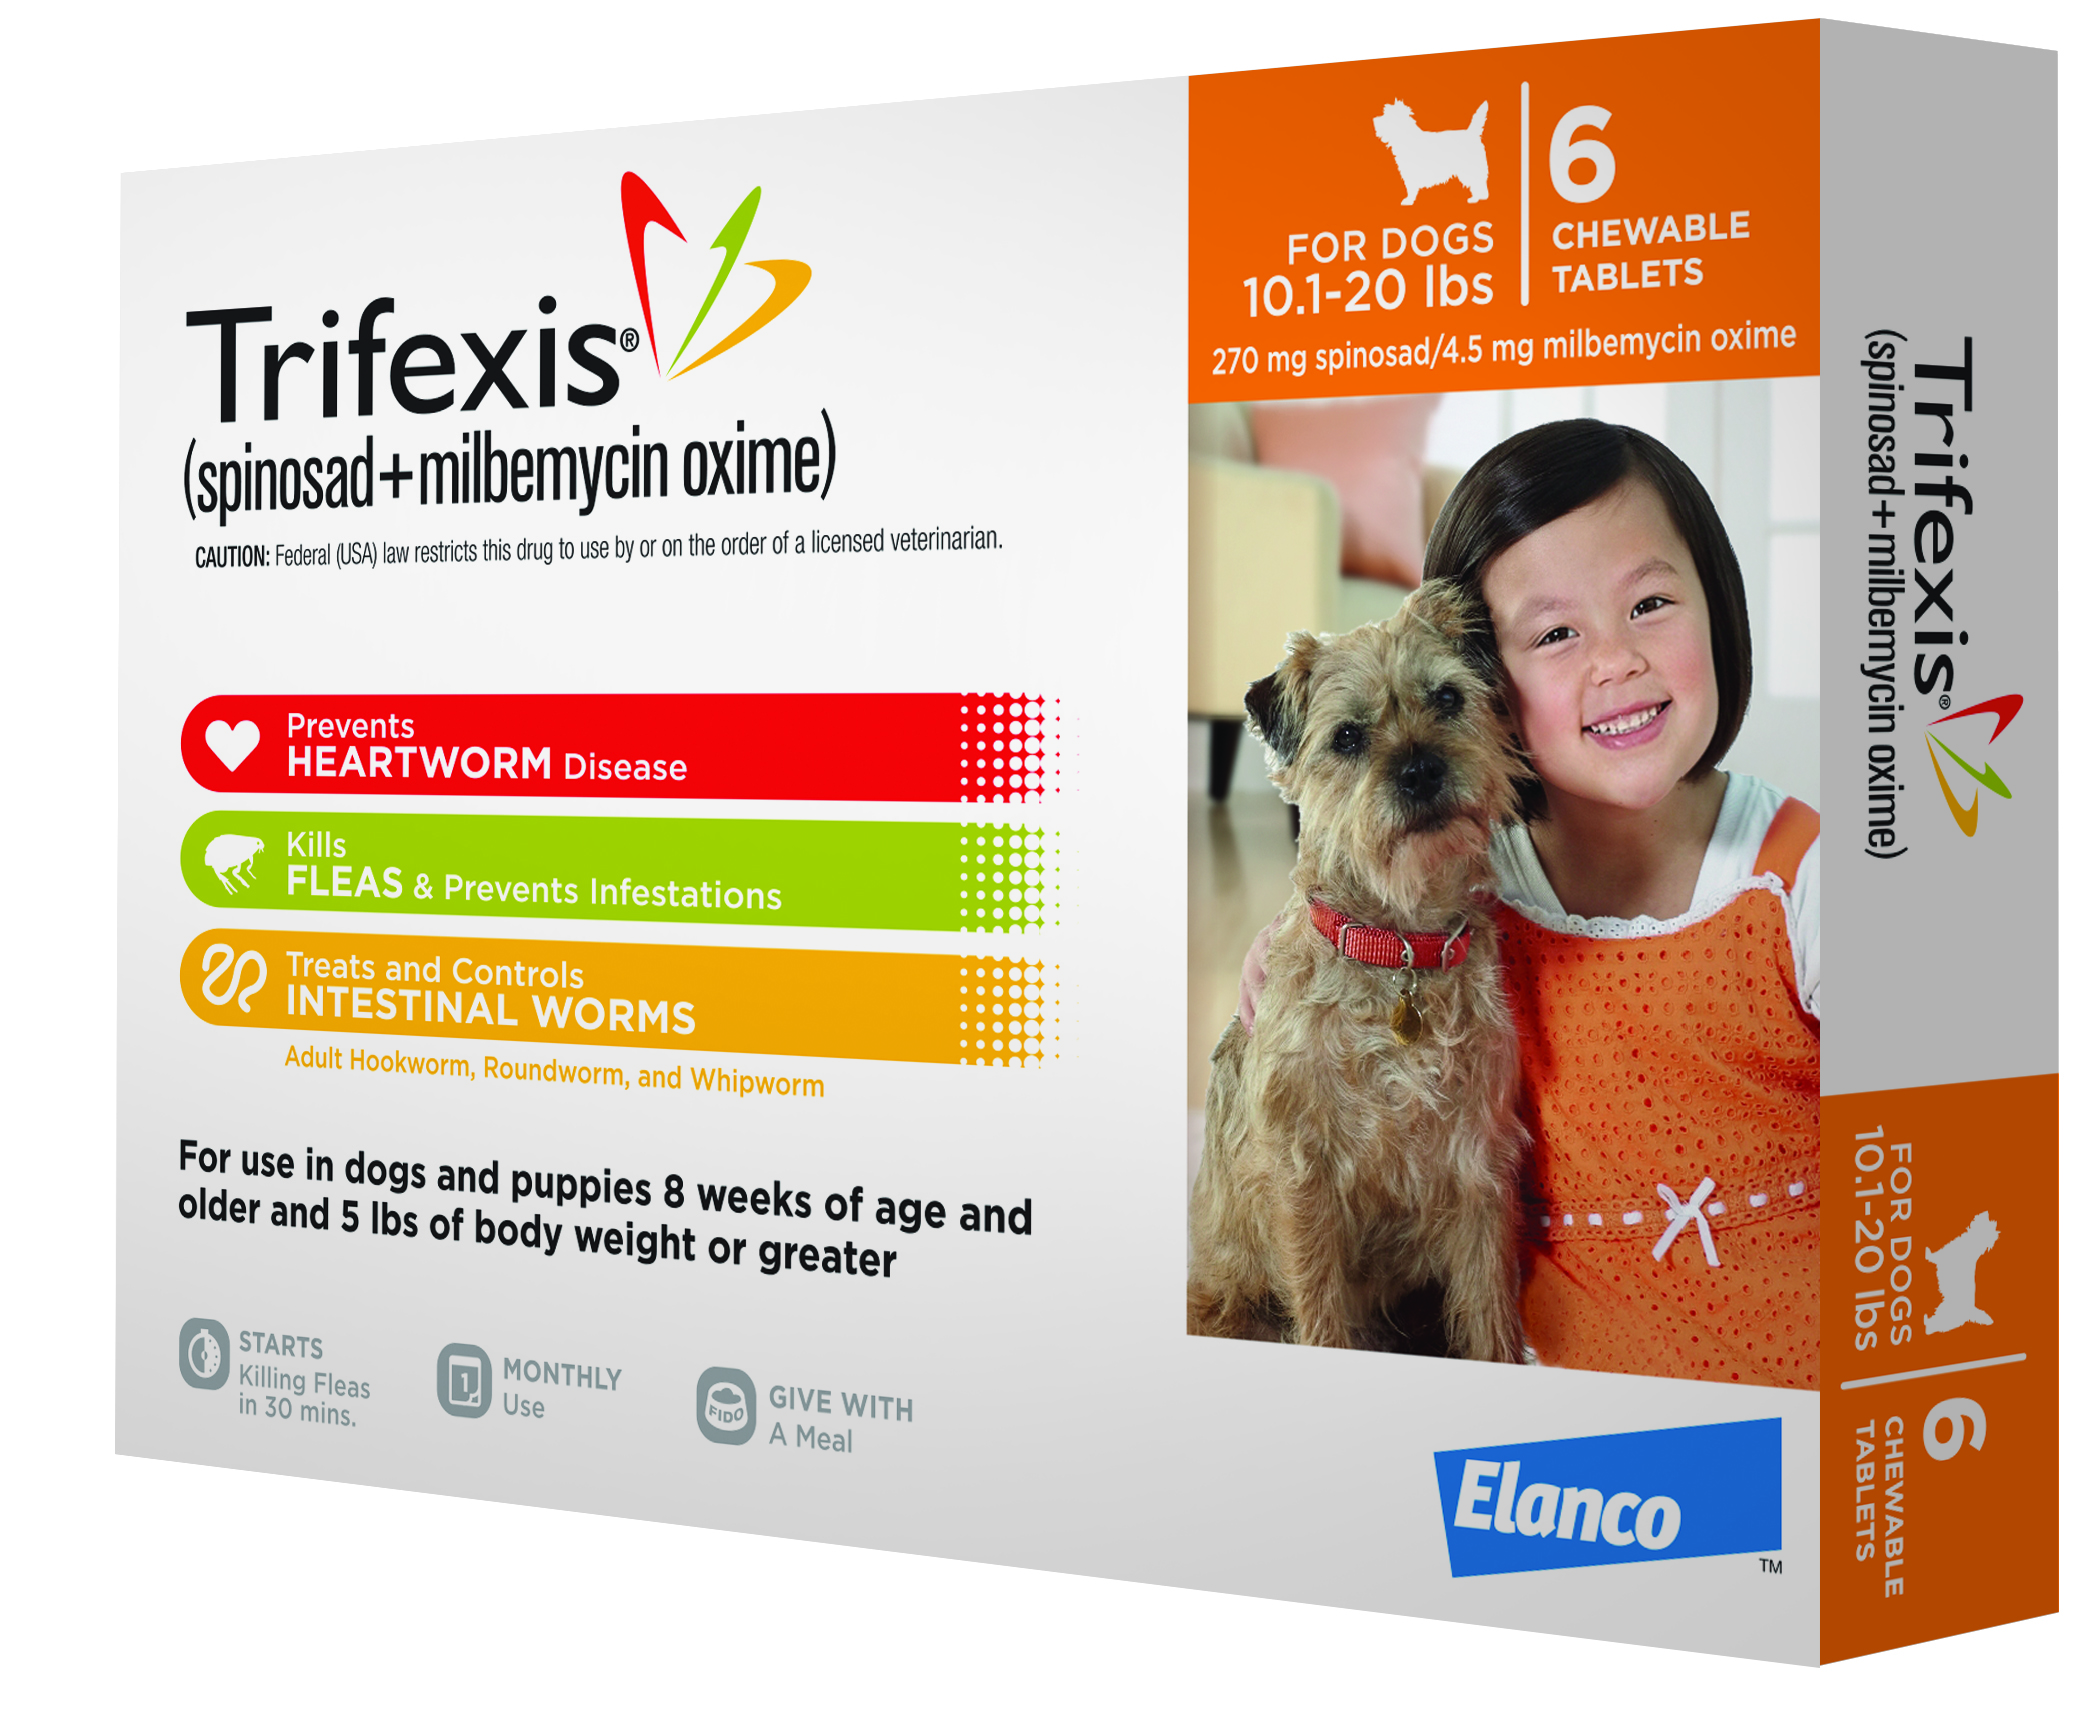 Trifexis 10.1-20lbs 1 Month Supply